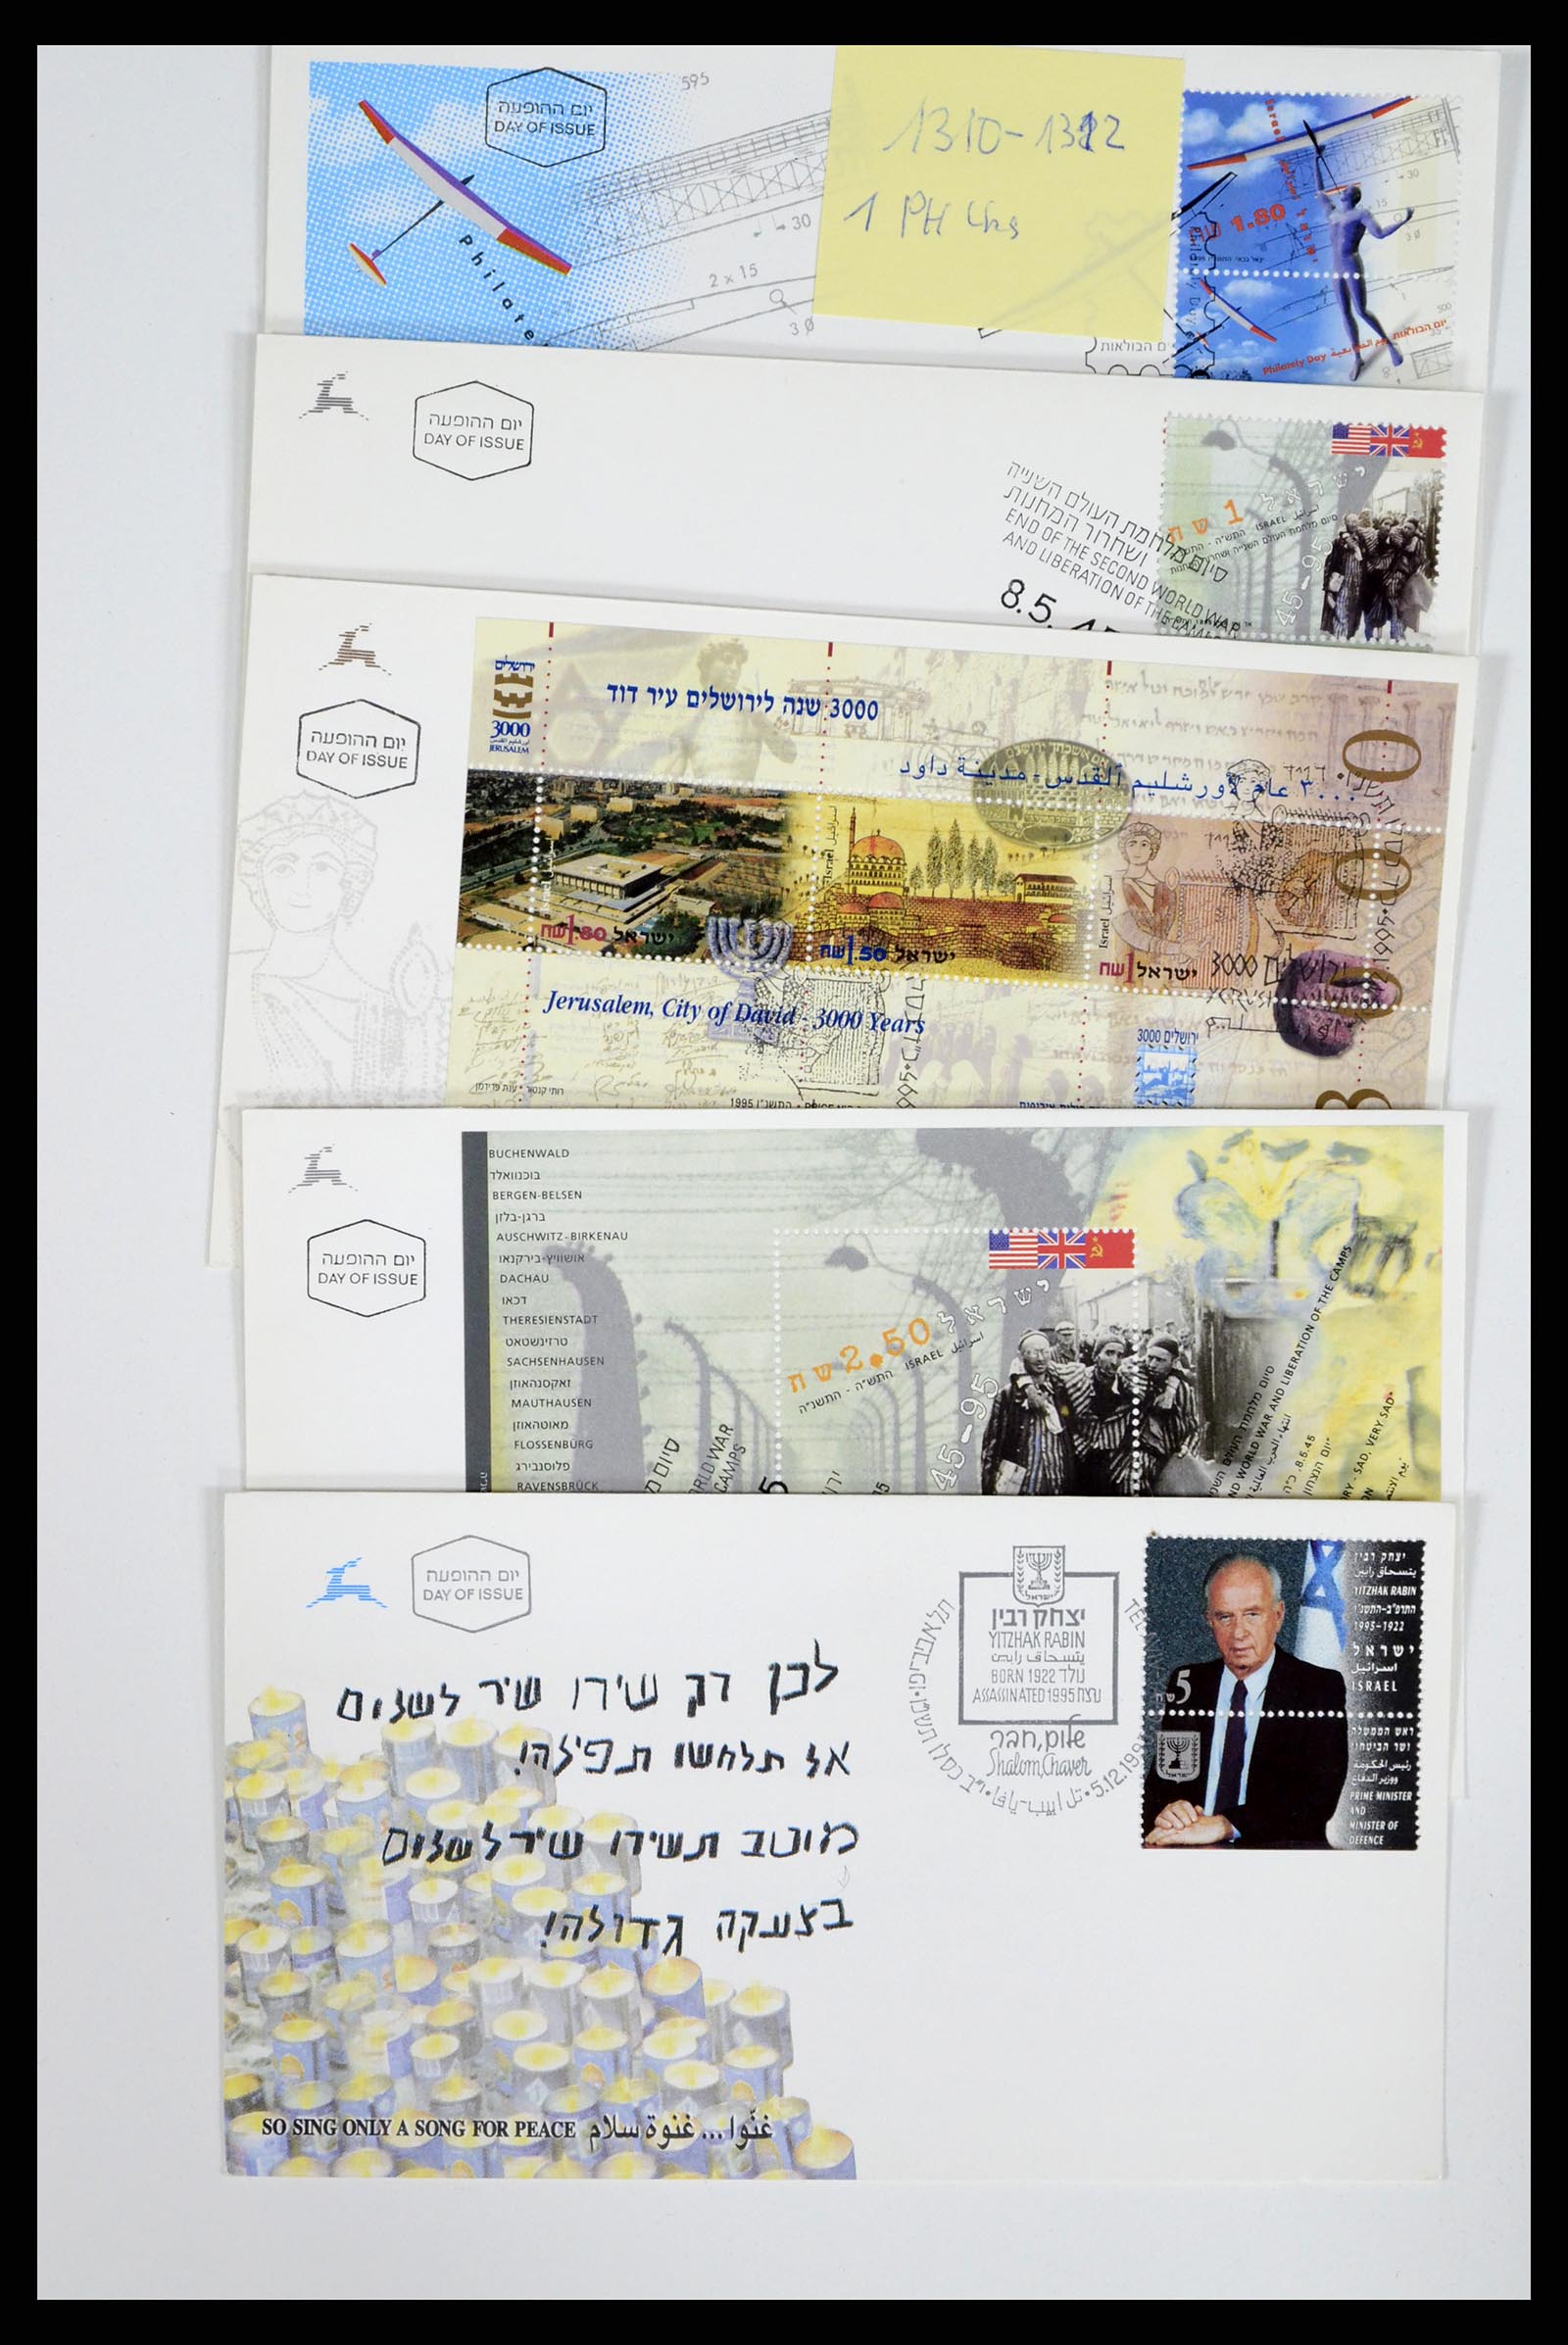 37711 033 - Stamp collection 37711 Israel first day covers 1970-2000.